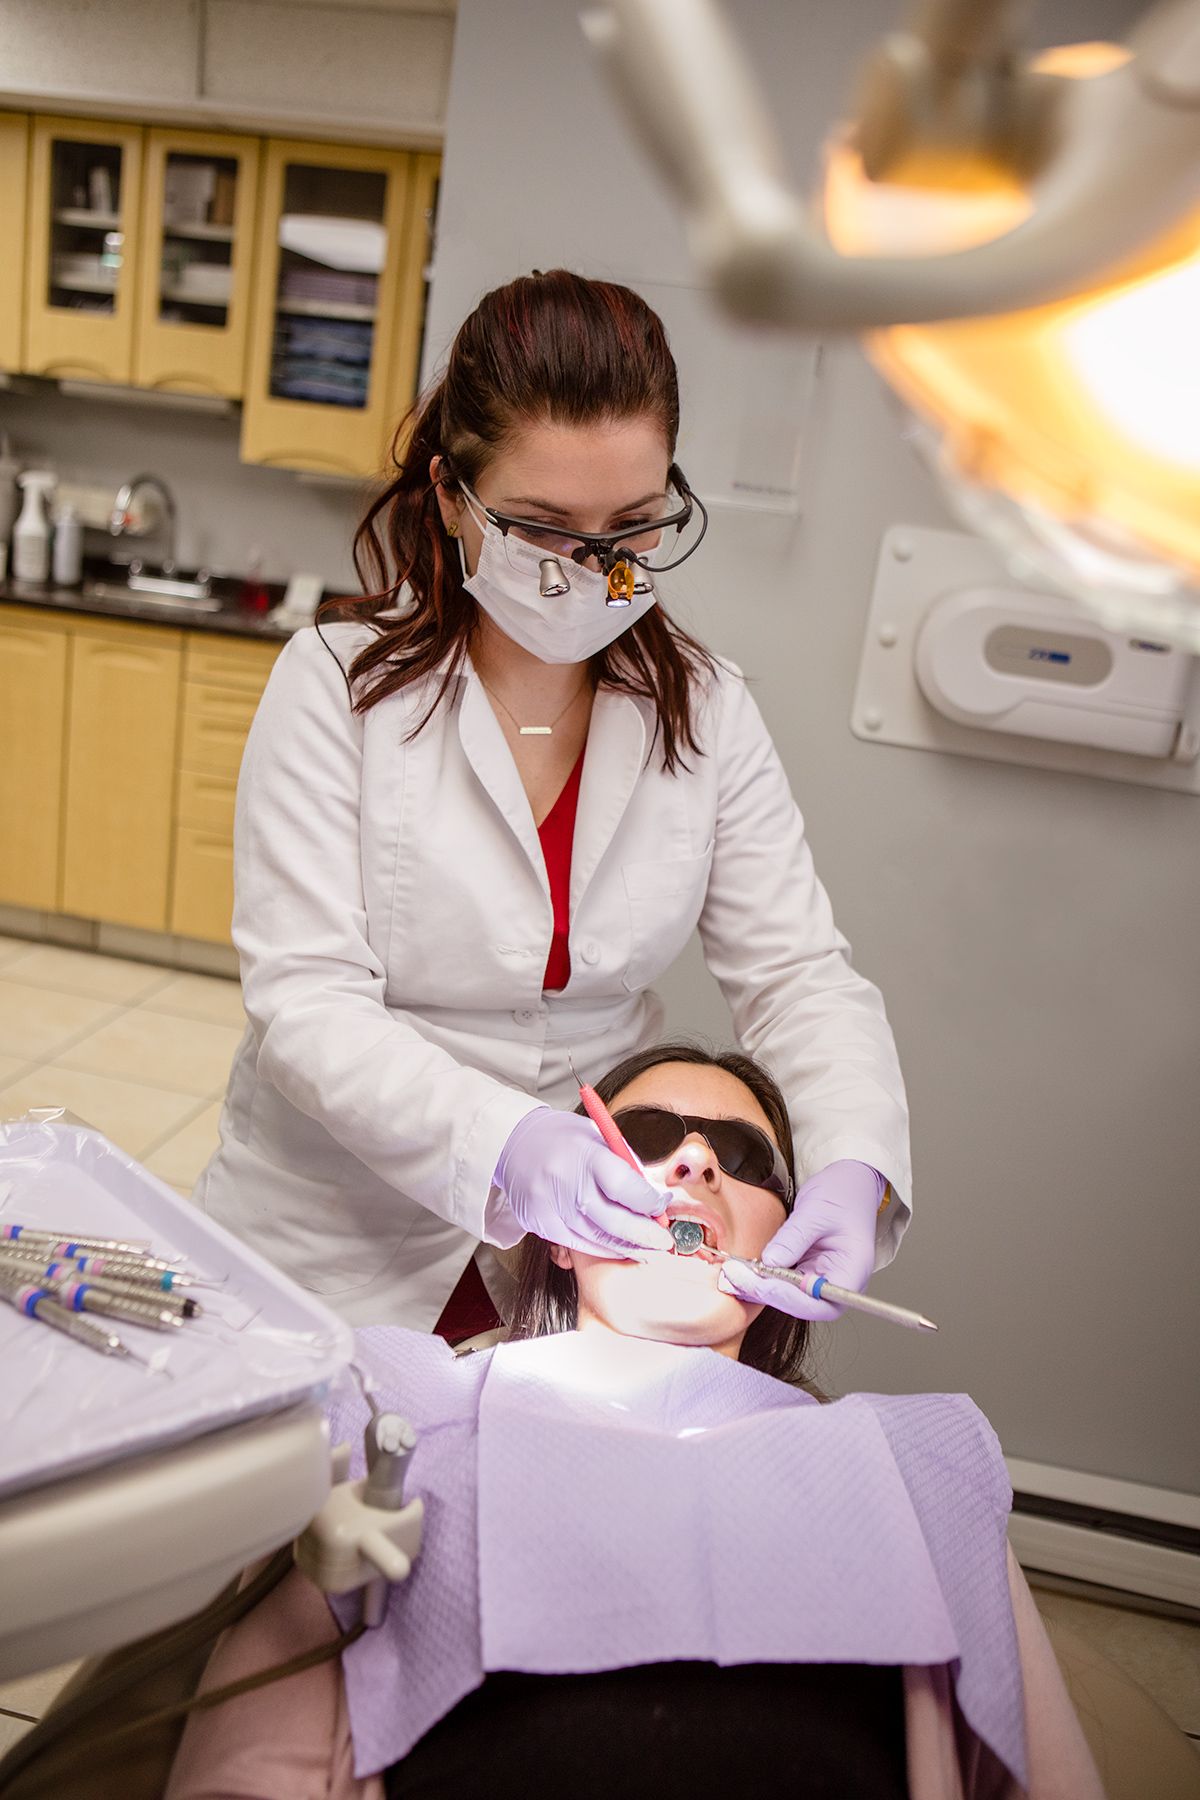 Dental Hygienist Working on a Patient